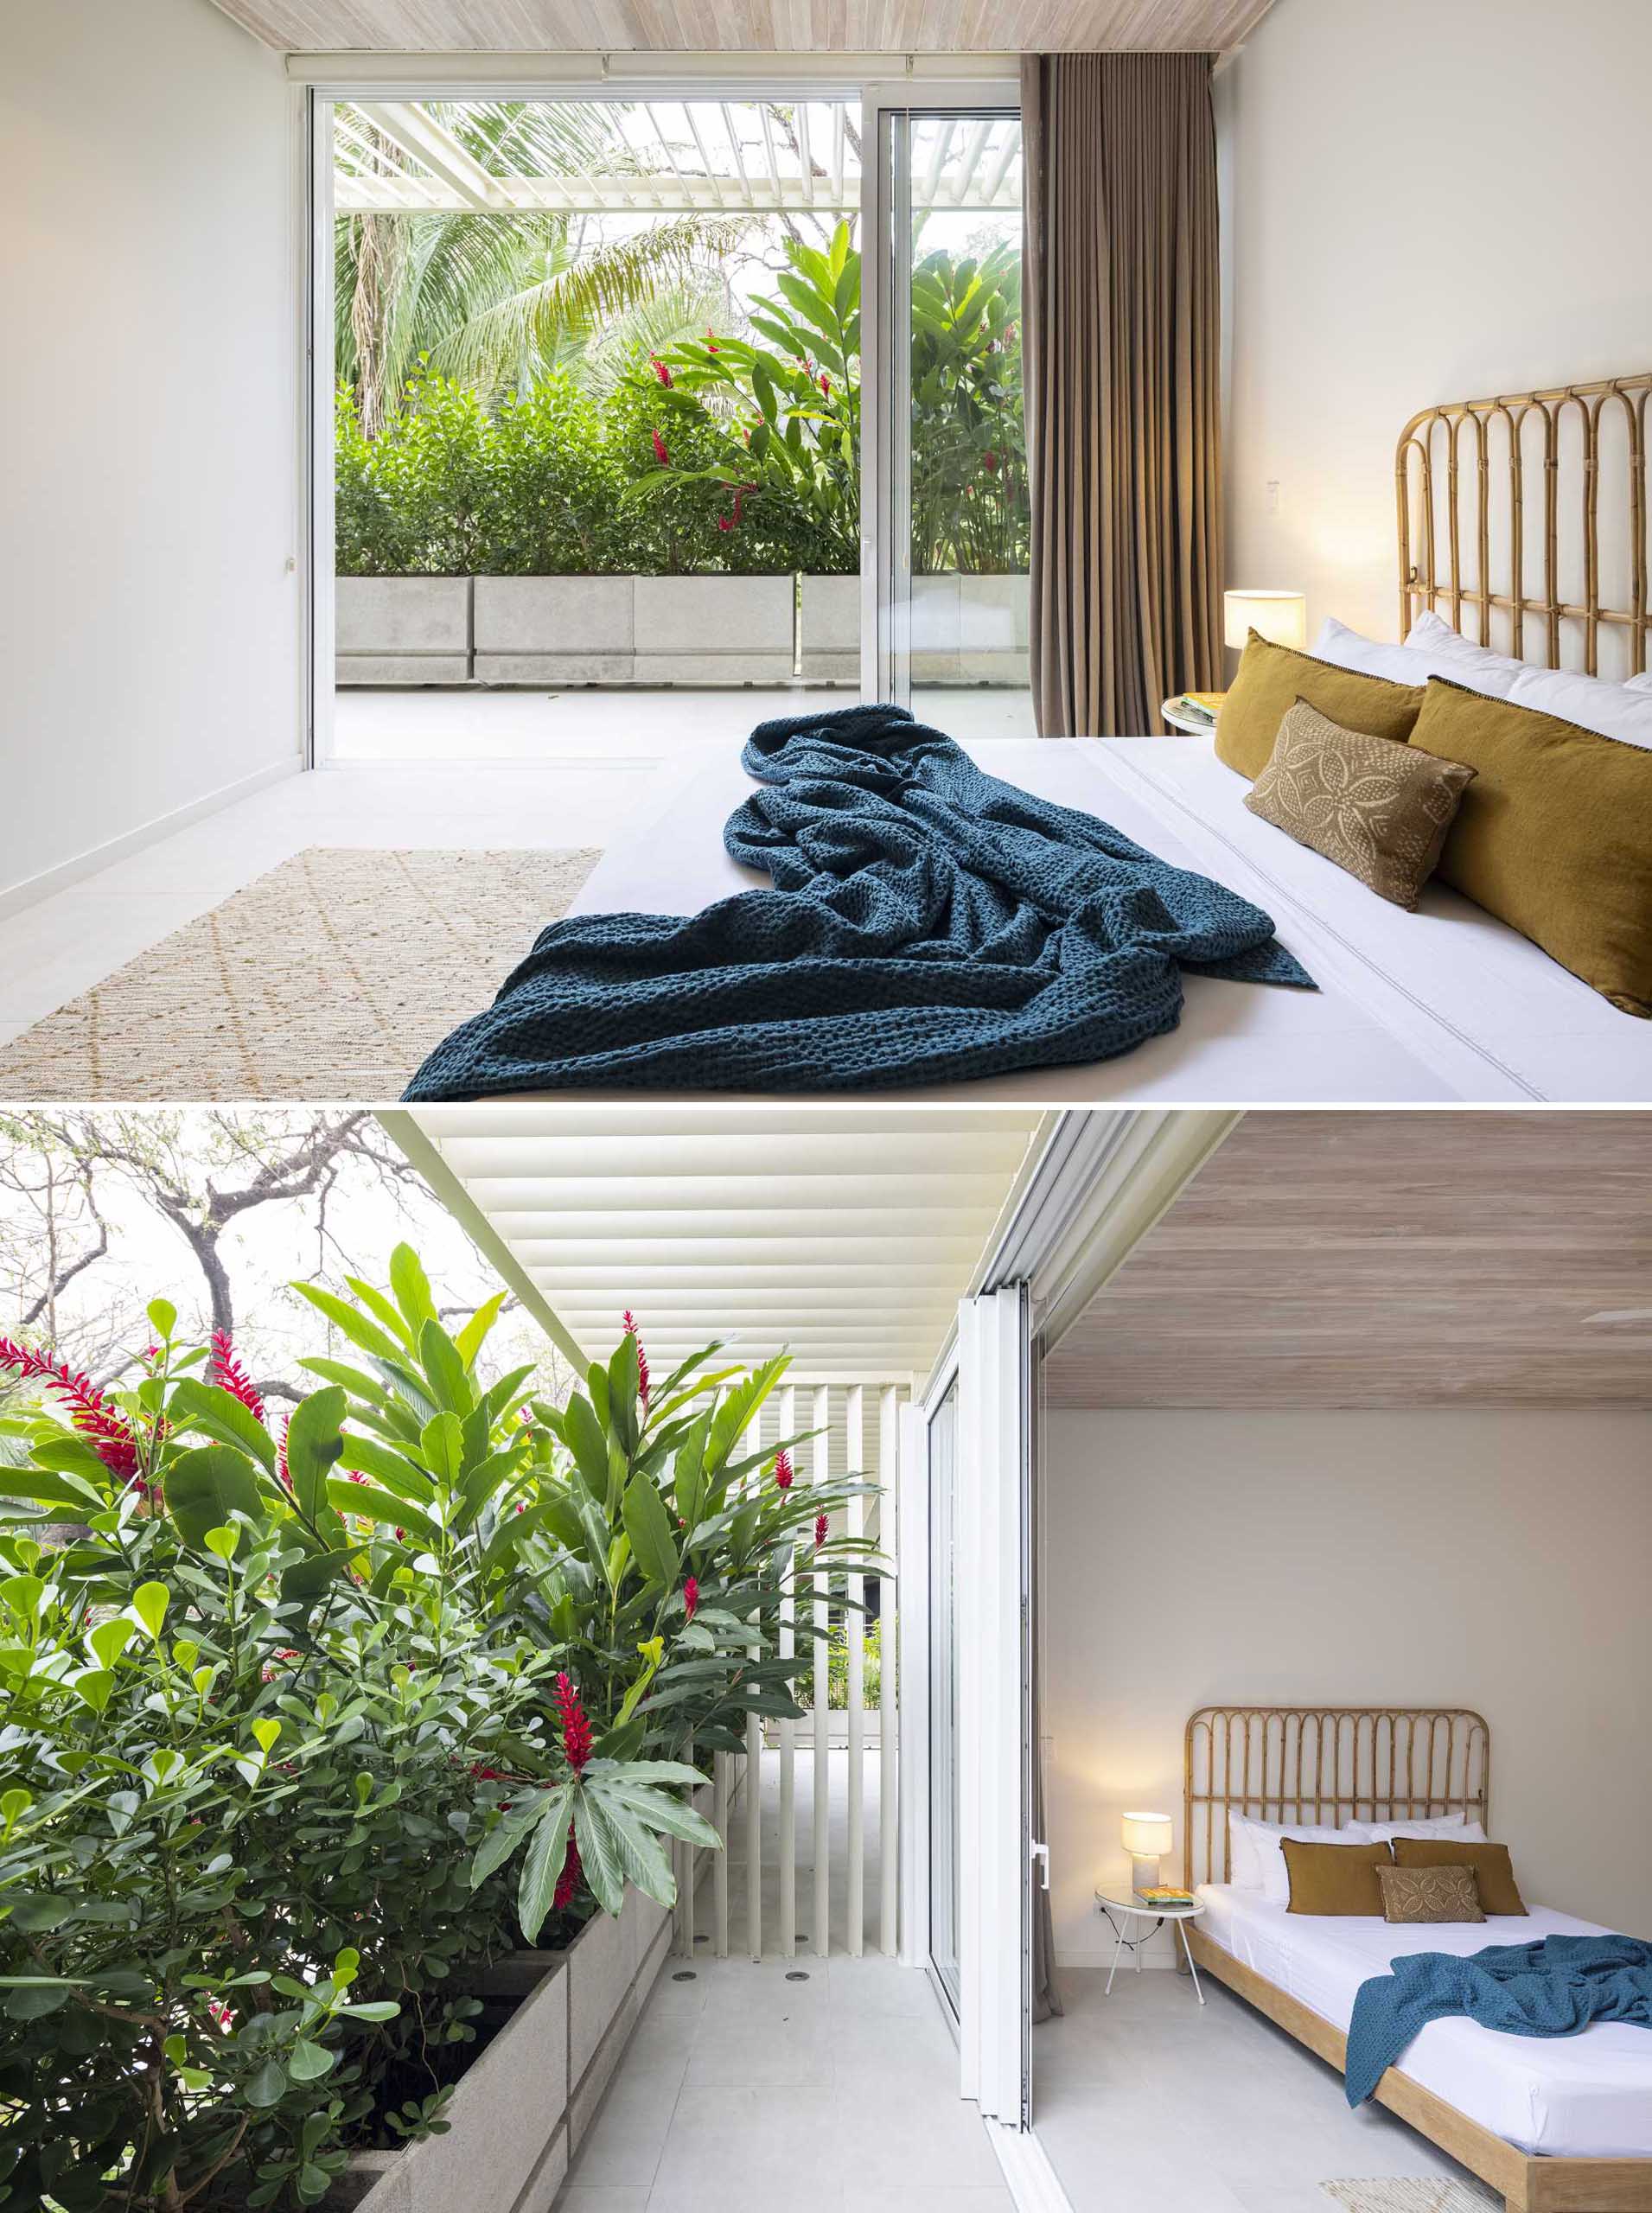 A modern bedroom that opens to an outdoor space with planter boxes filled with tropical plants.